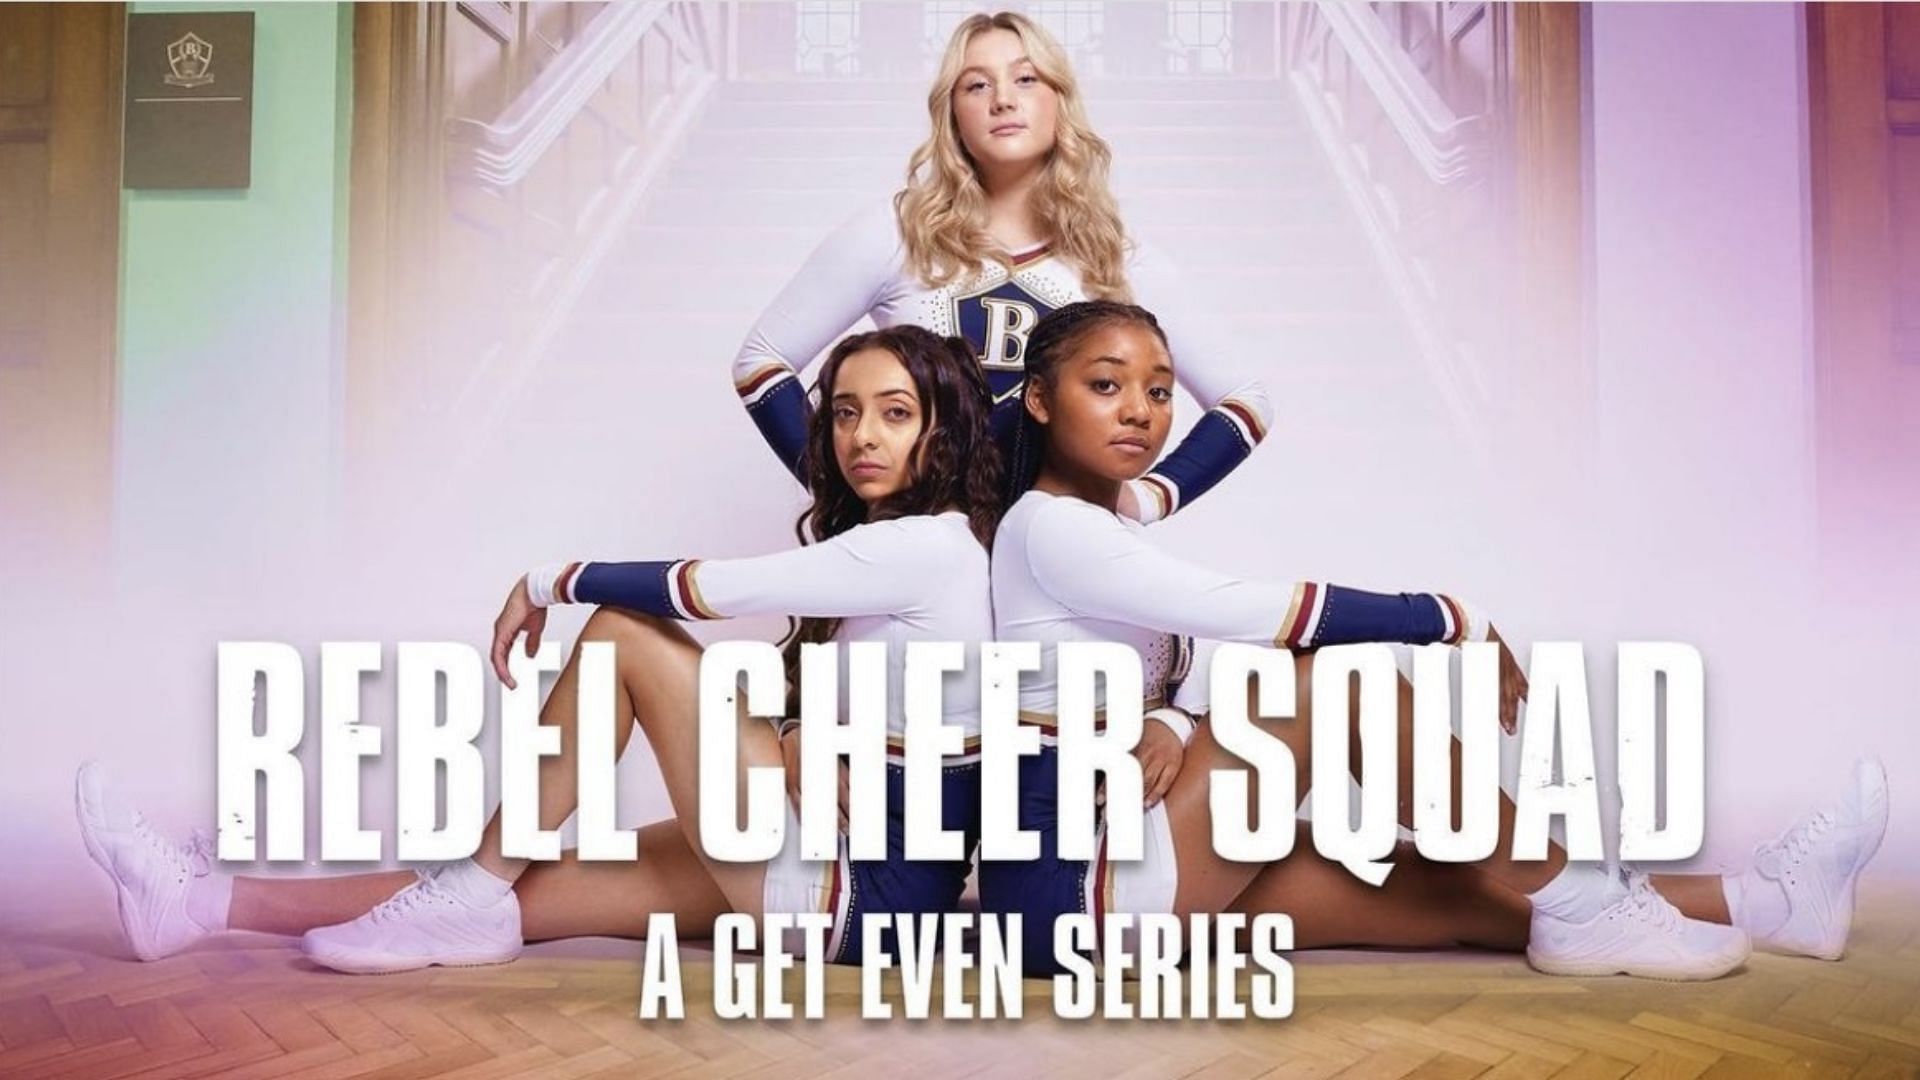 Rebel Cheer Squad: A Get Even Series is currently streaming on Netflix (Image Via IMDb/Google)